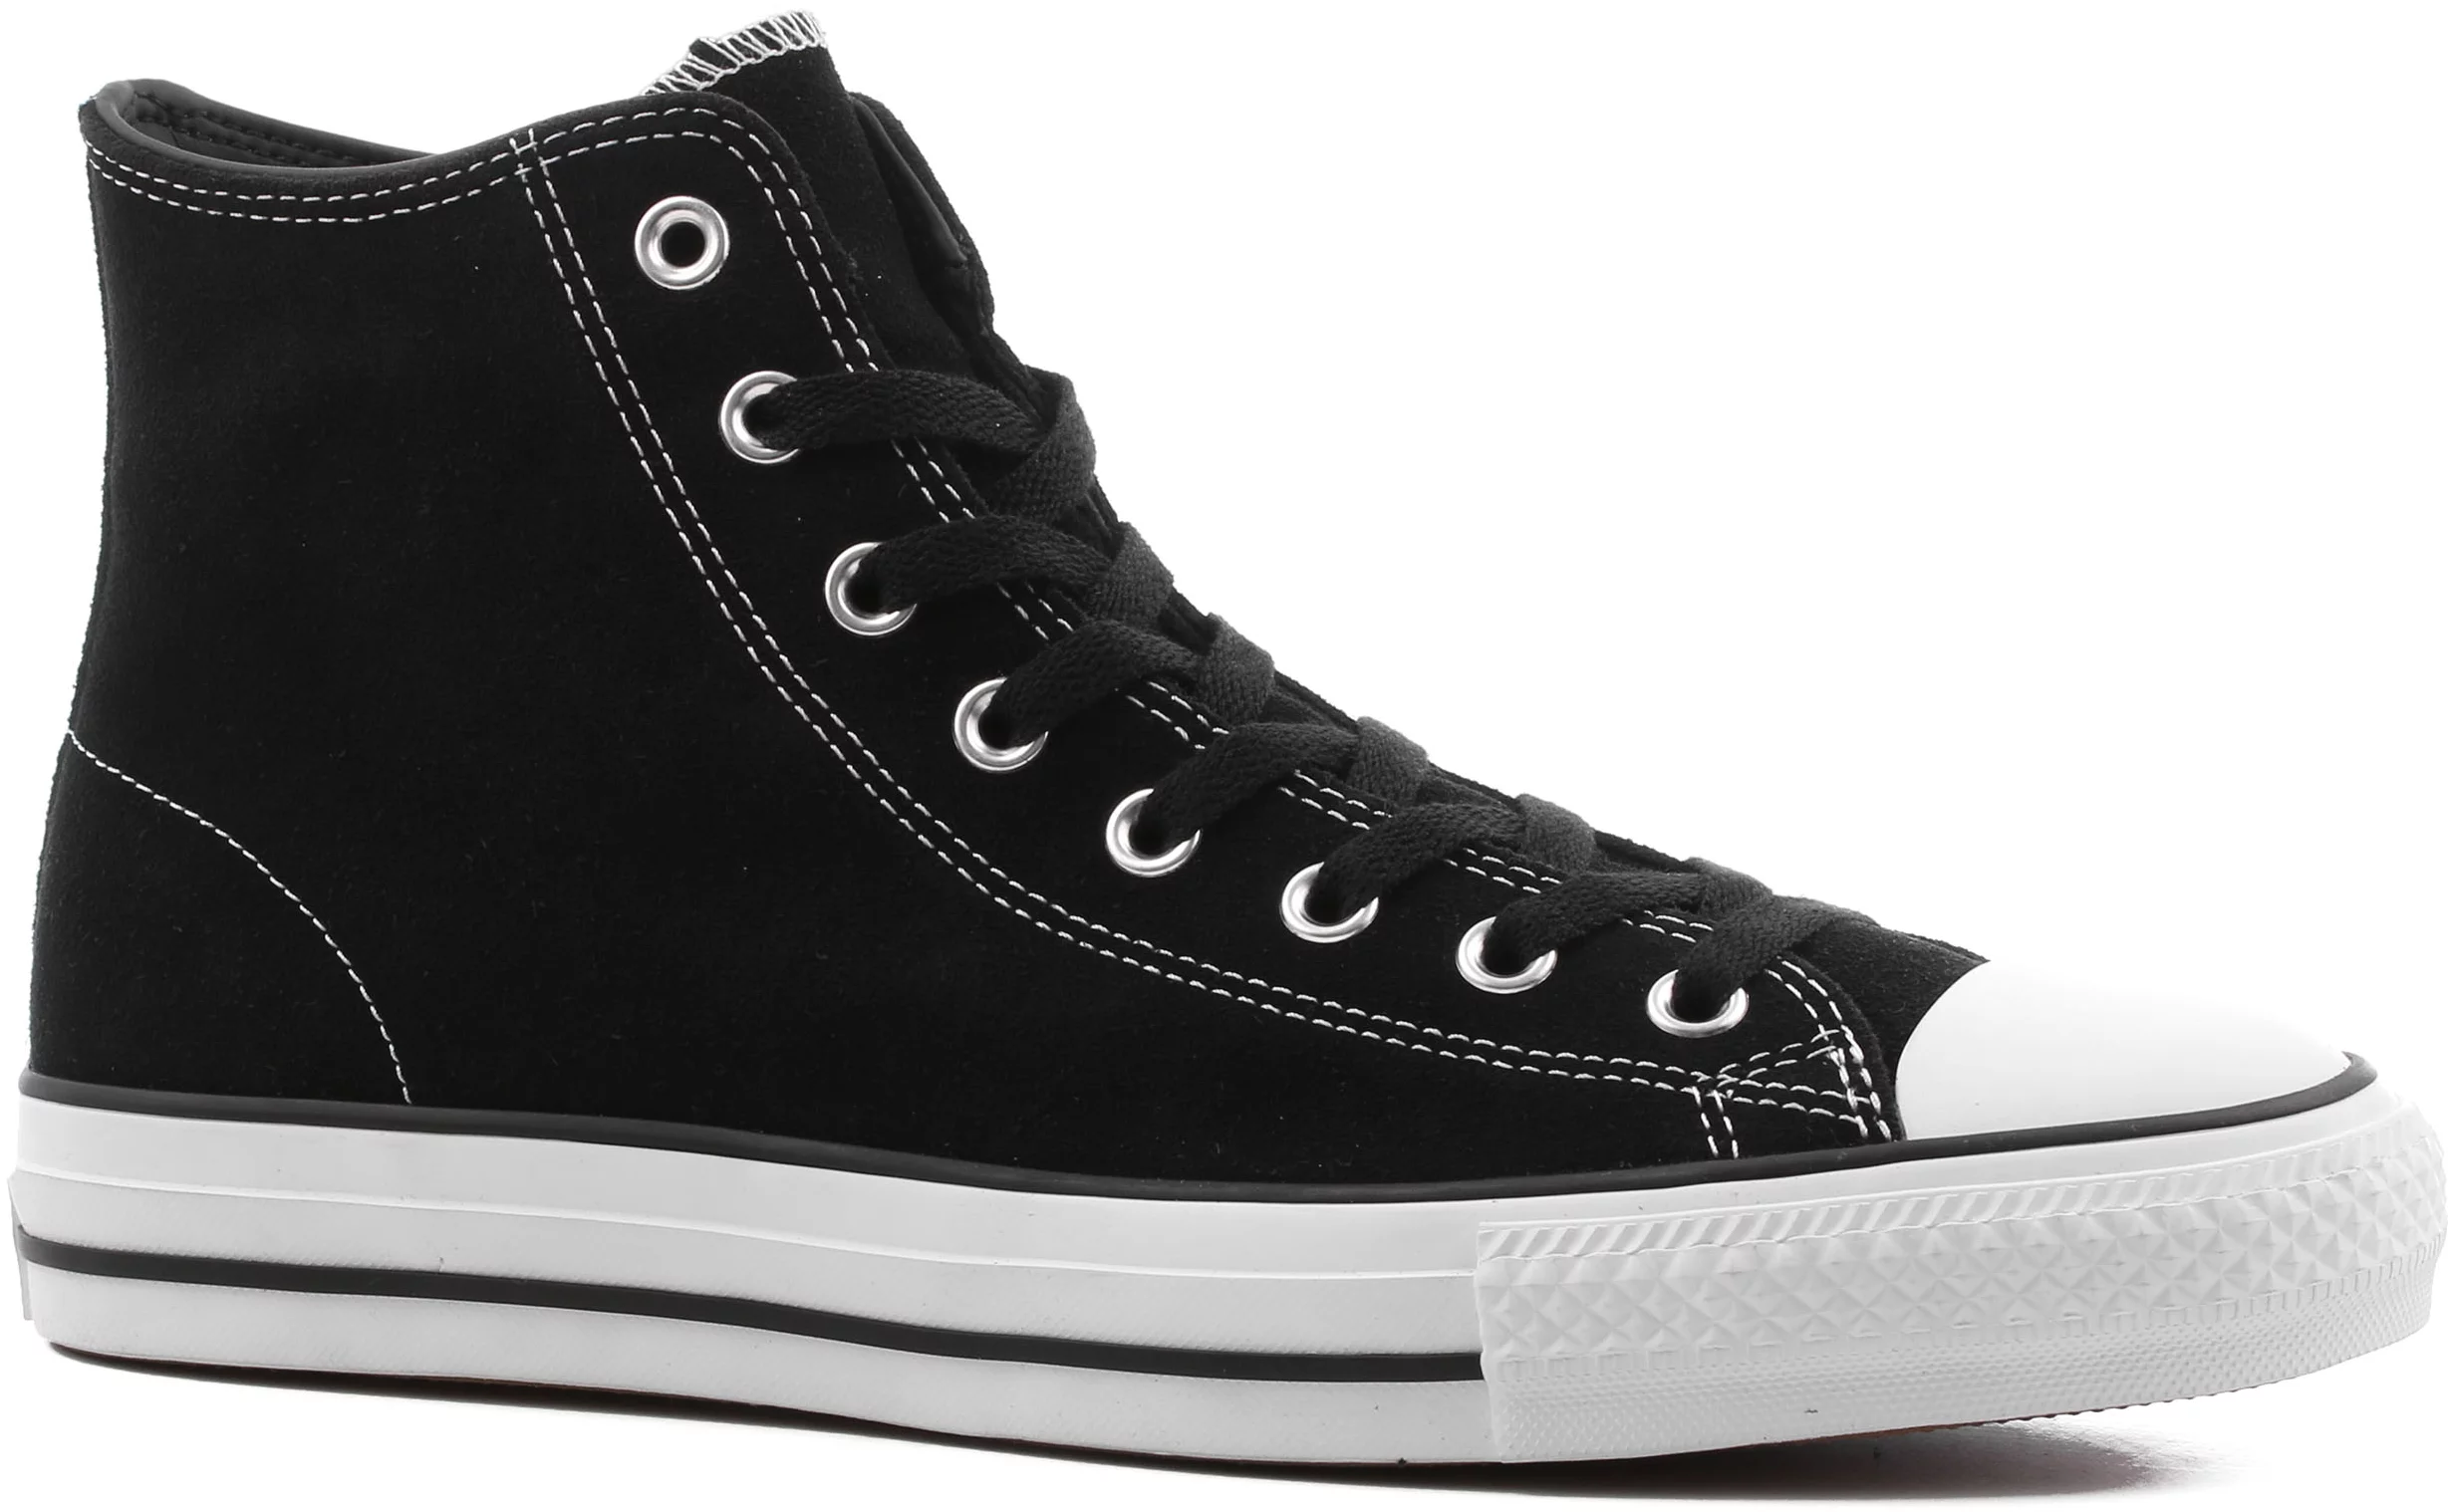 Chuck Taylor All Star Pro High Skate Shoes - (suede) black/black/white - Free Shipping | Tactics